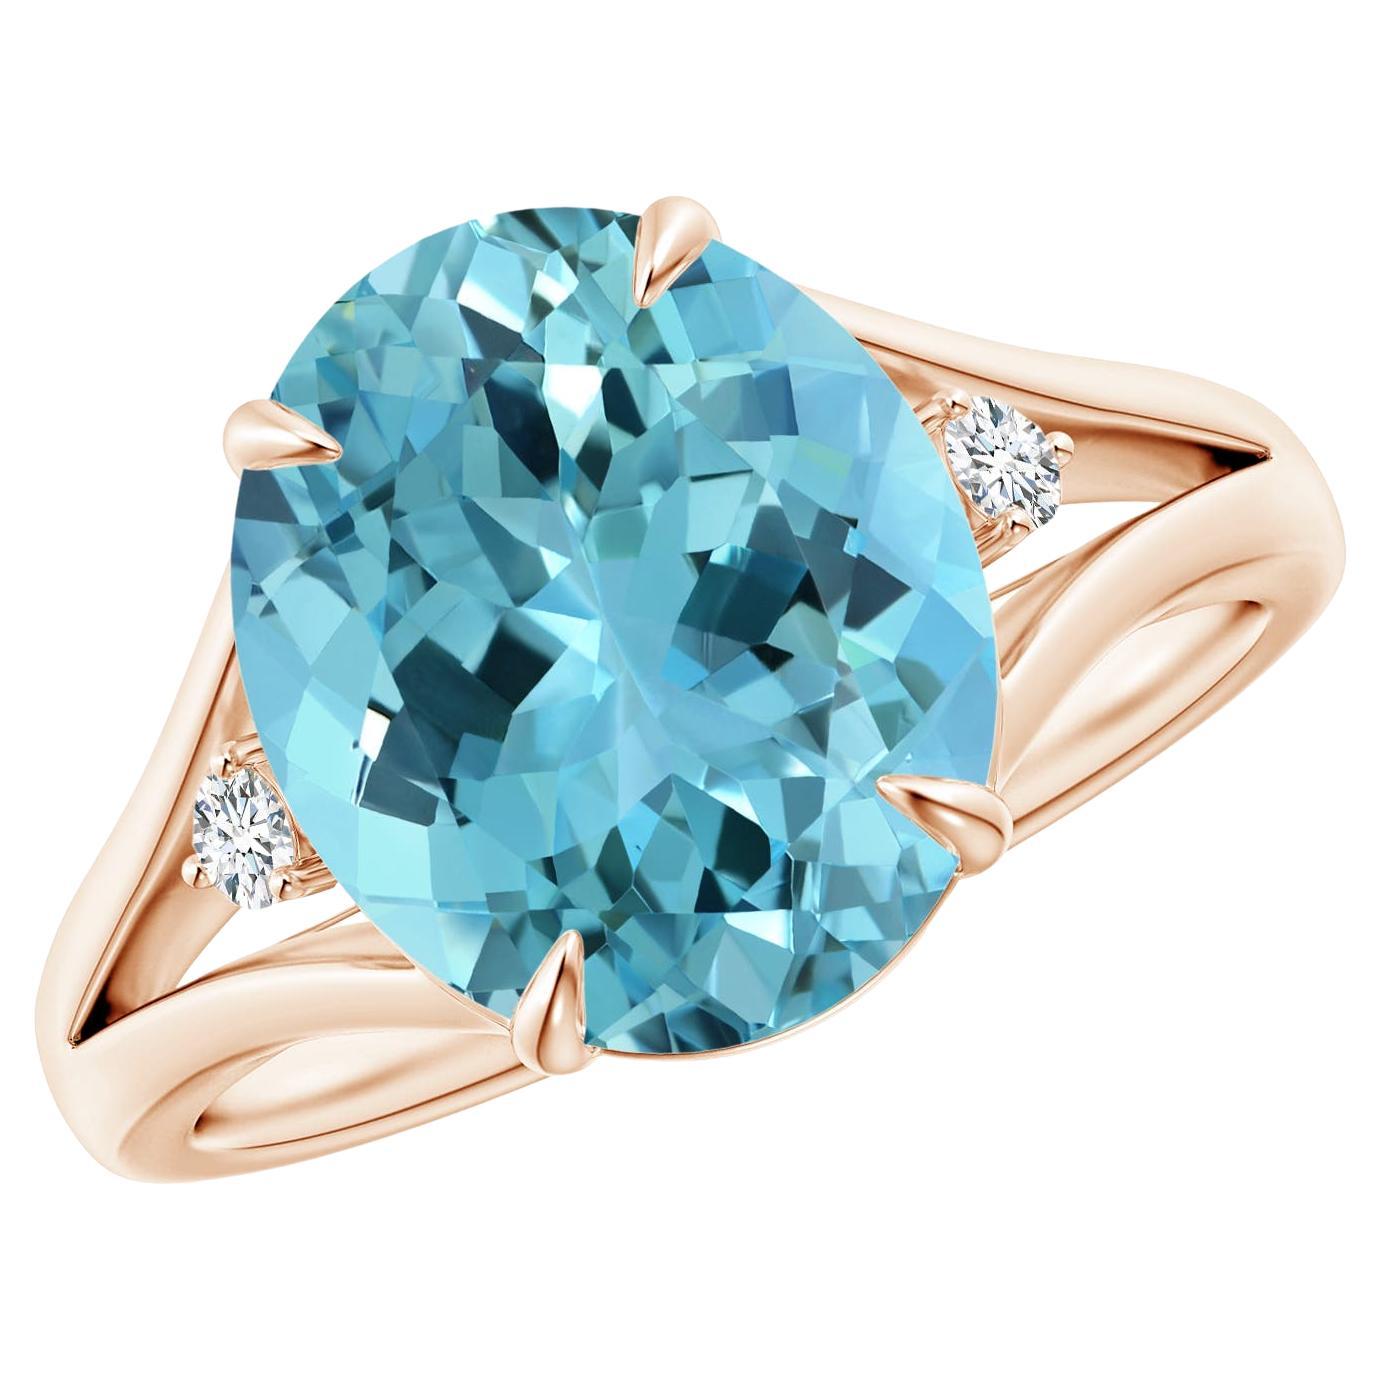 ANGARA GIA Certified Natural Aquamarine Ring in Rose Gold with Diamond Accents